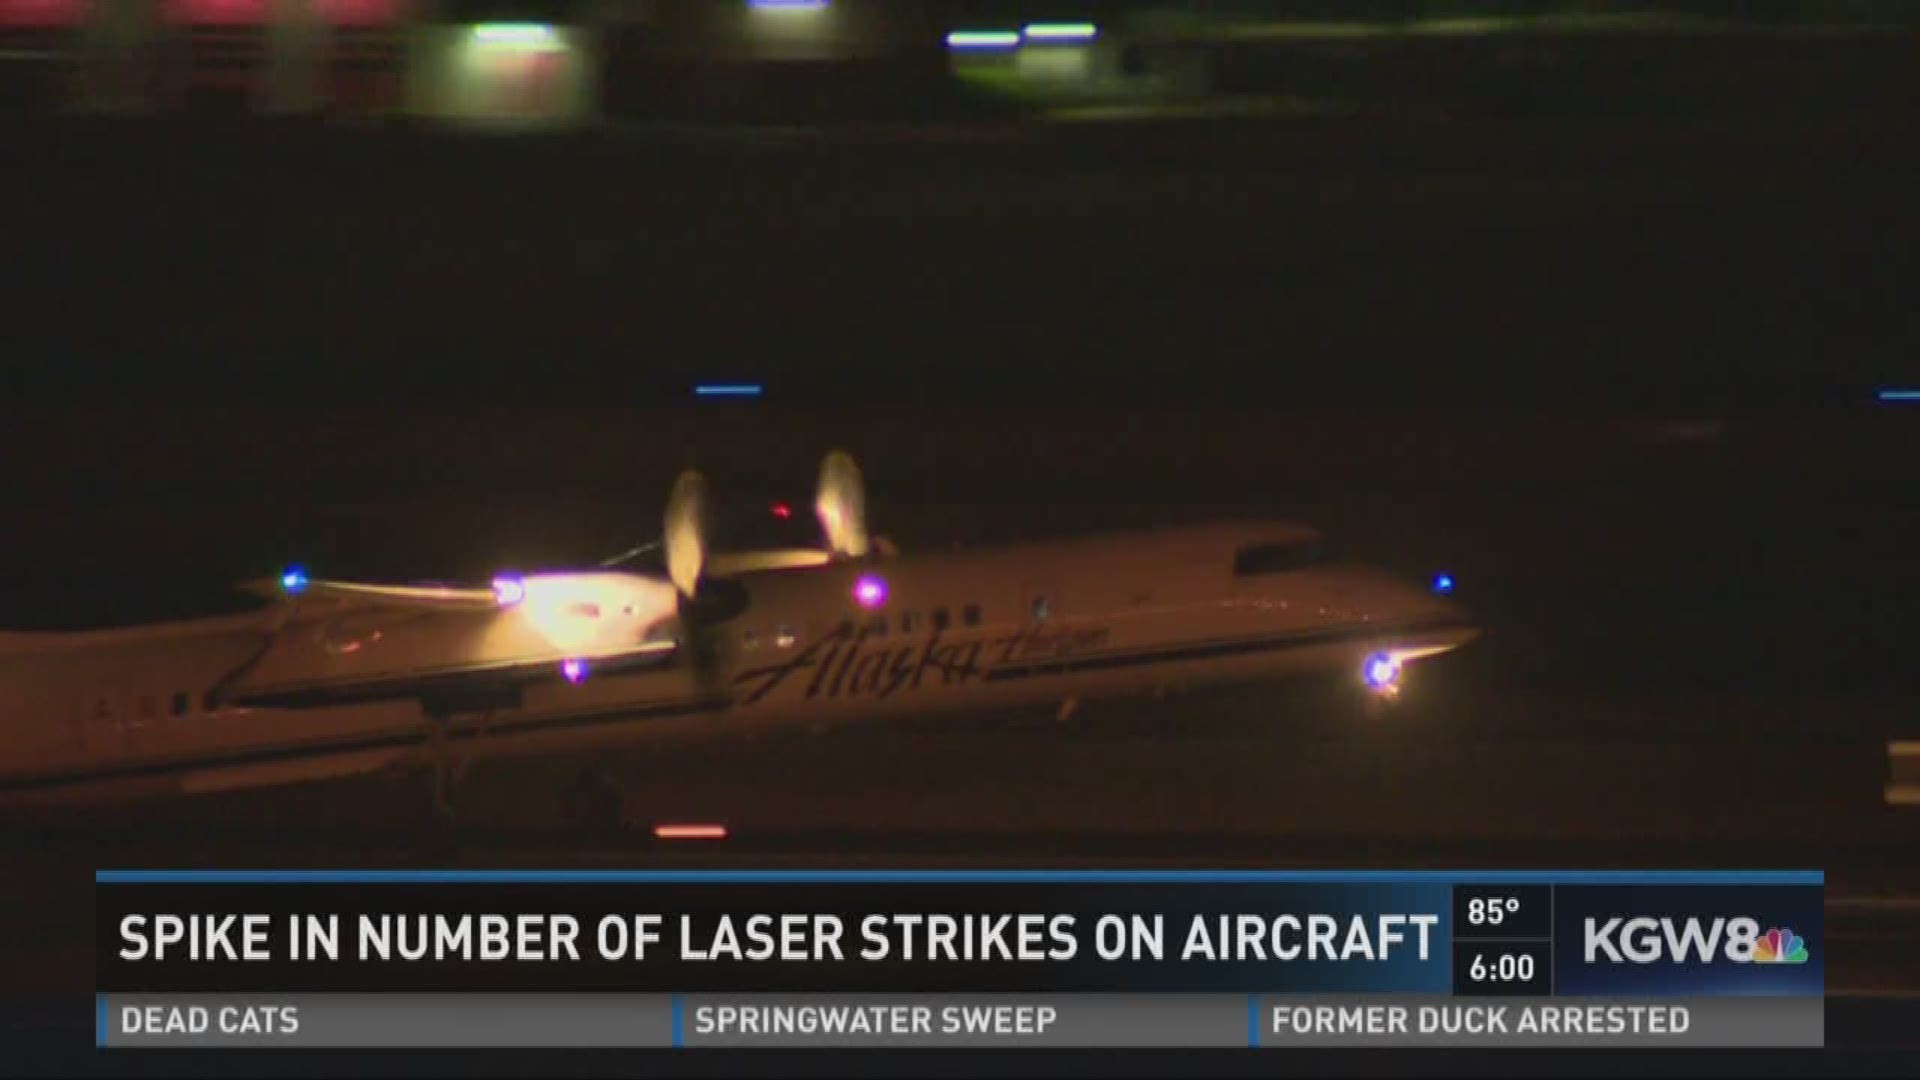 Spike in number of laser strikes on aircraft